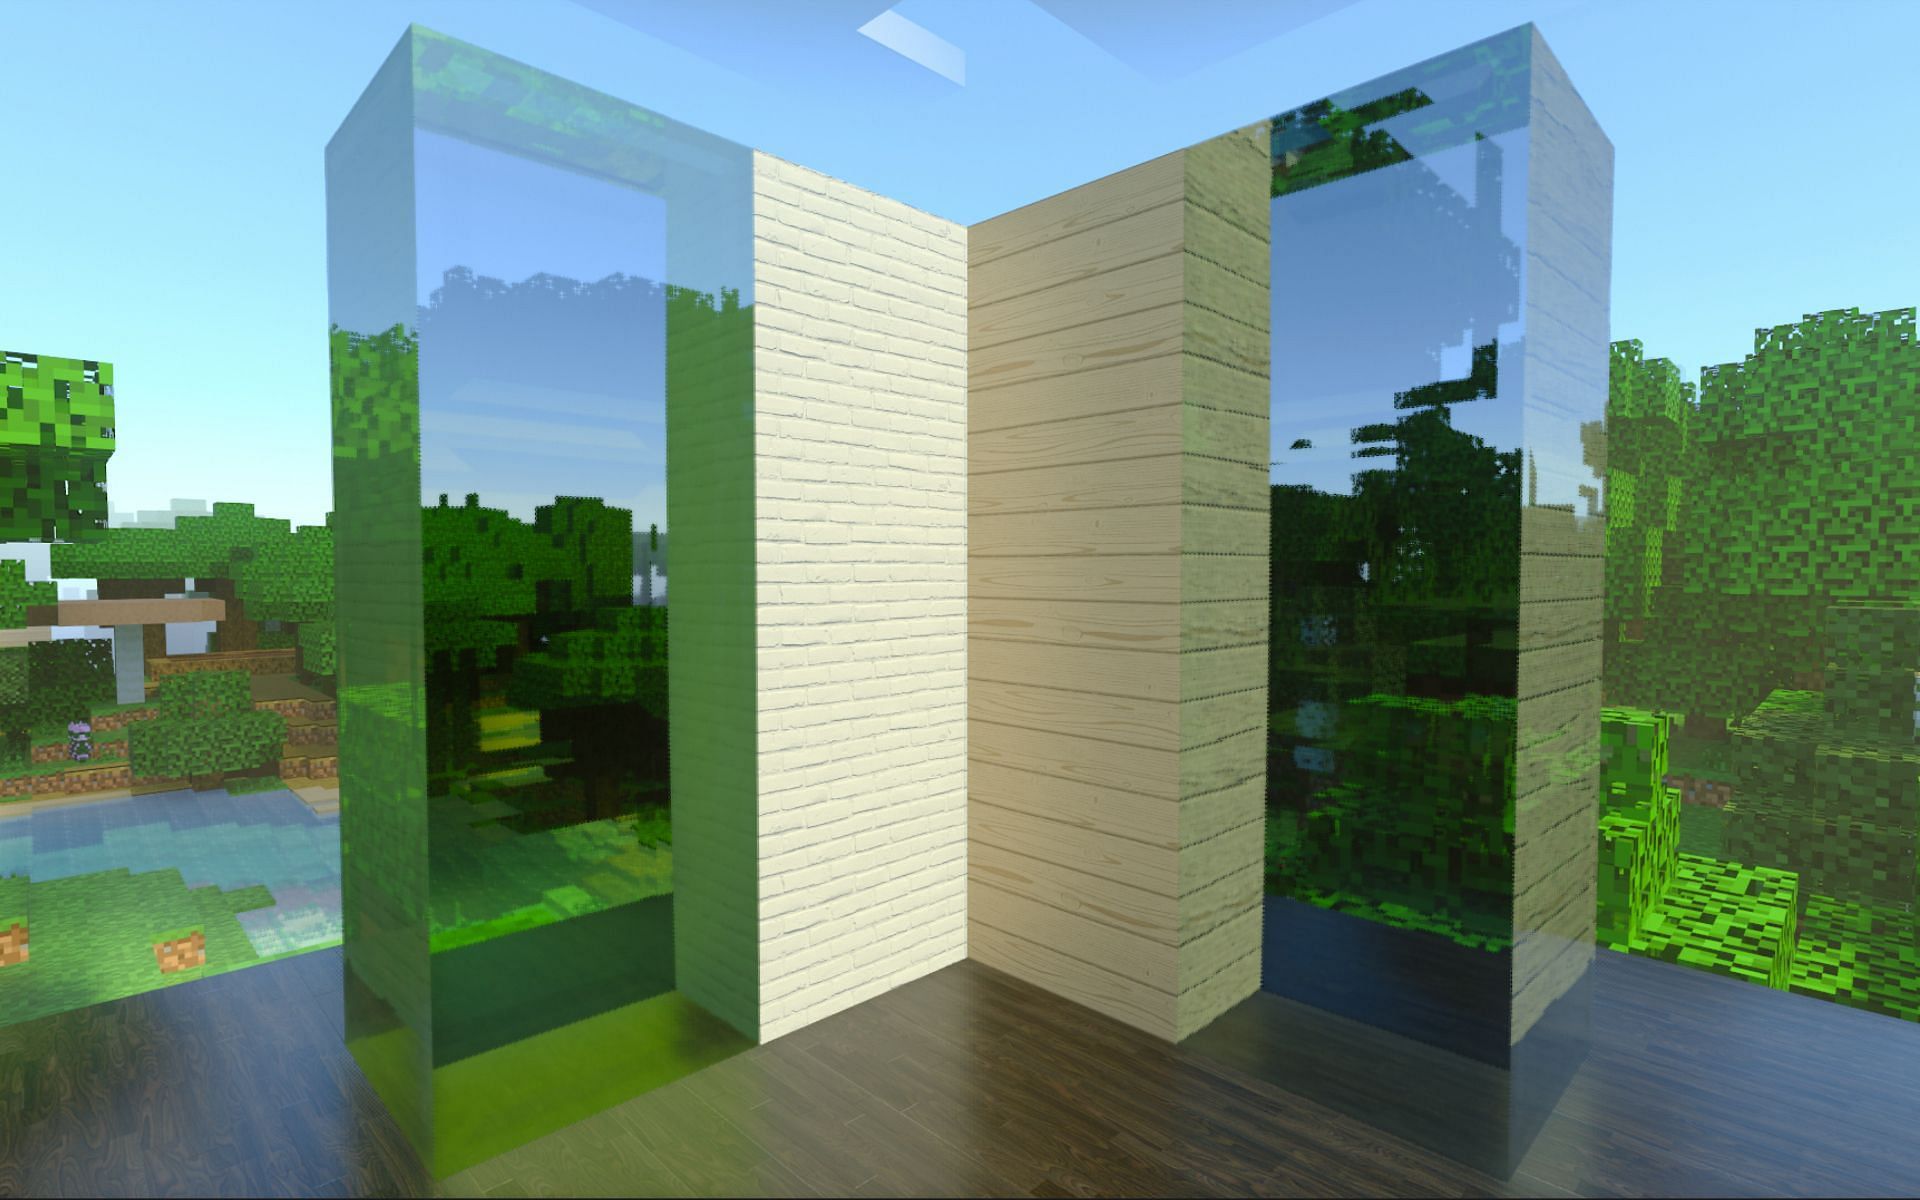 Summer classic textures for 1.20 Minecraft Texture Pack